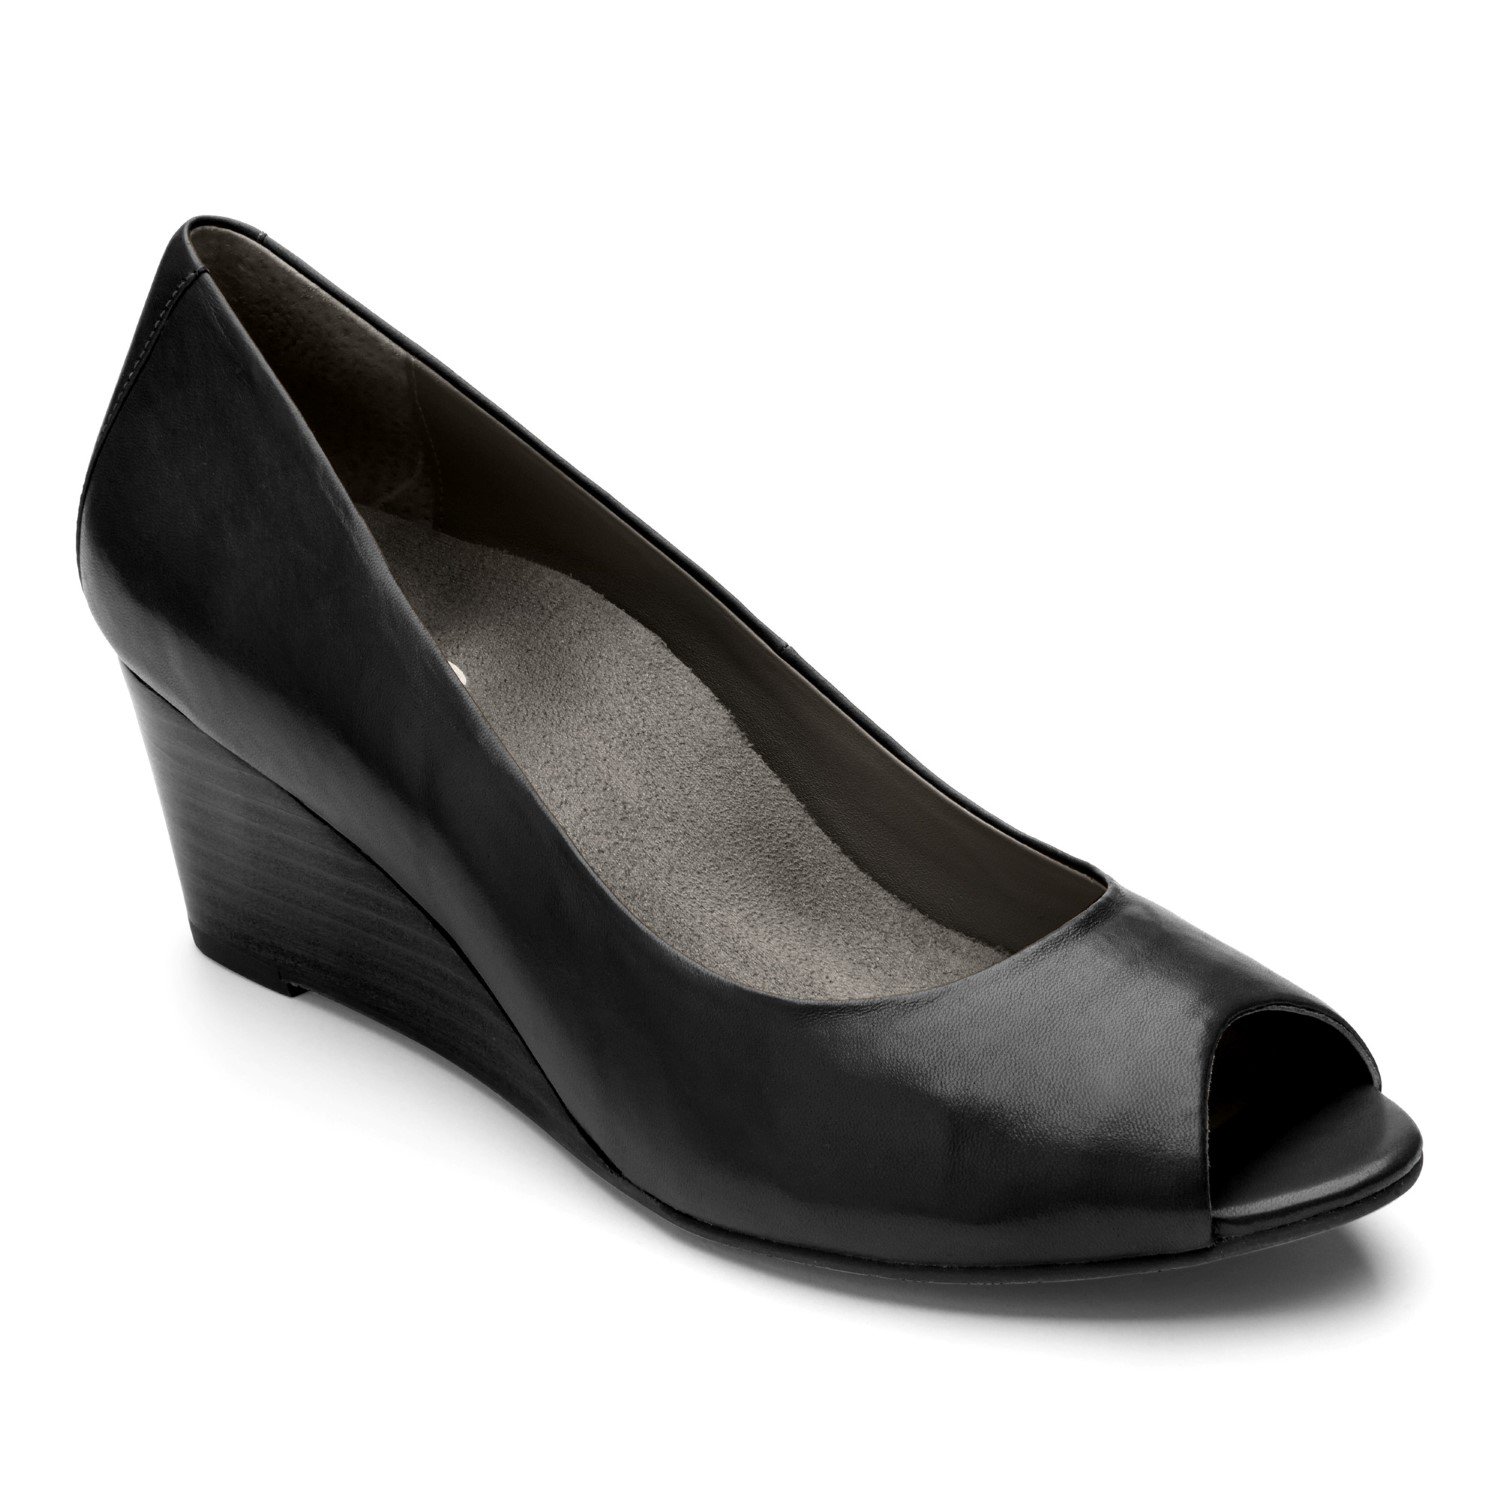 open toe black wedge shoes